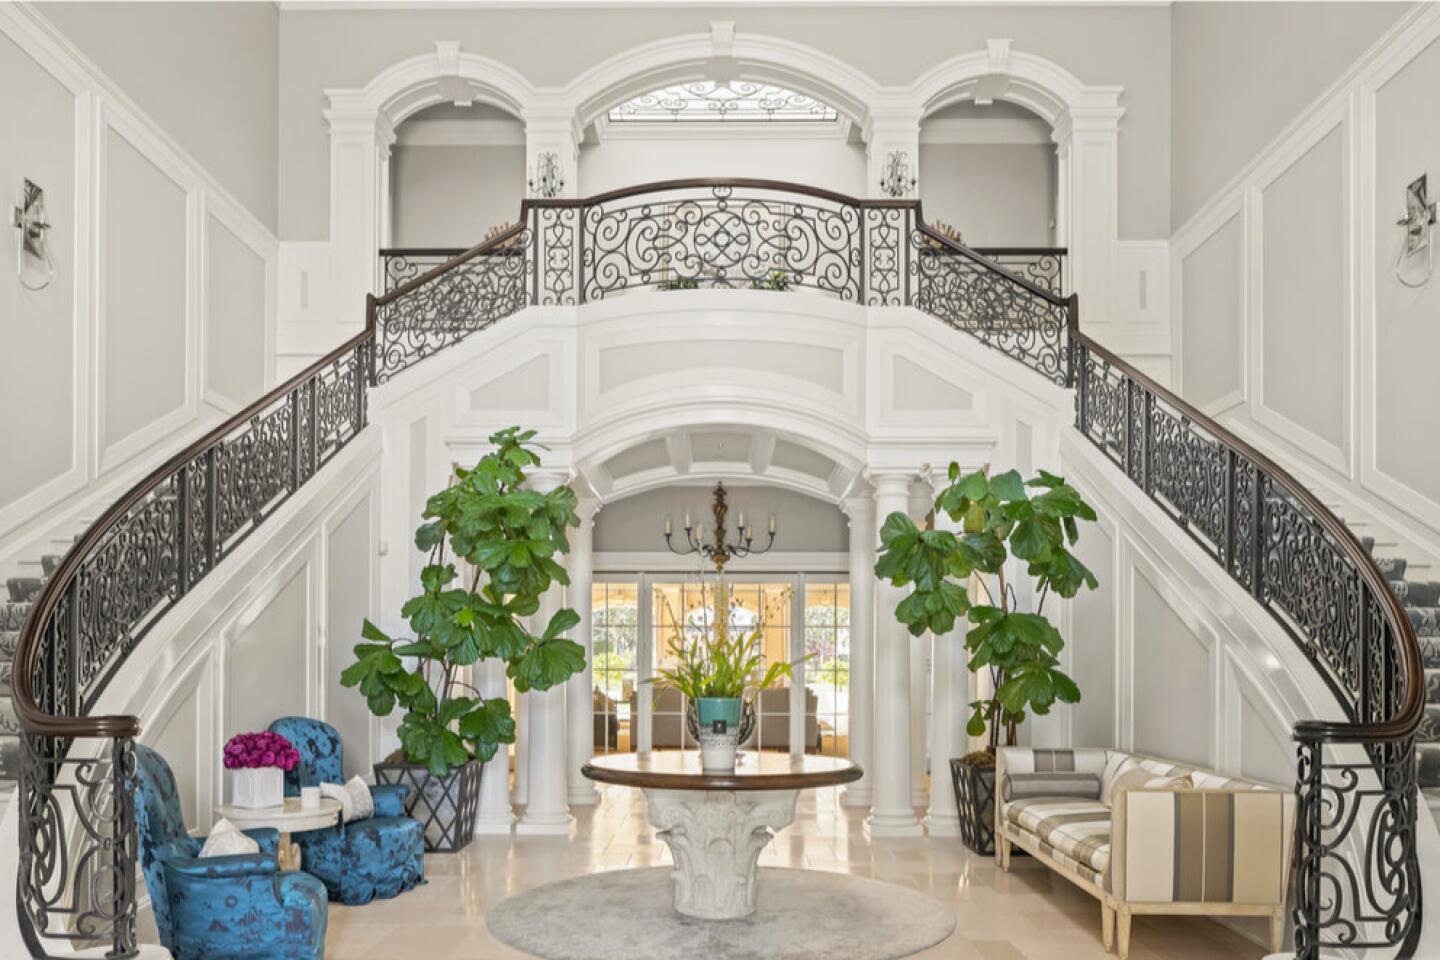 The entry with double stairway with railings, plants and furnishings.